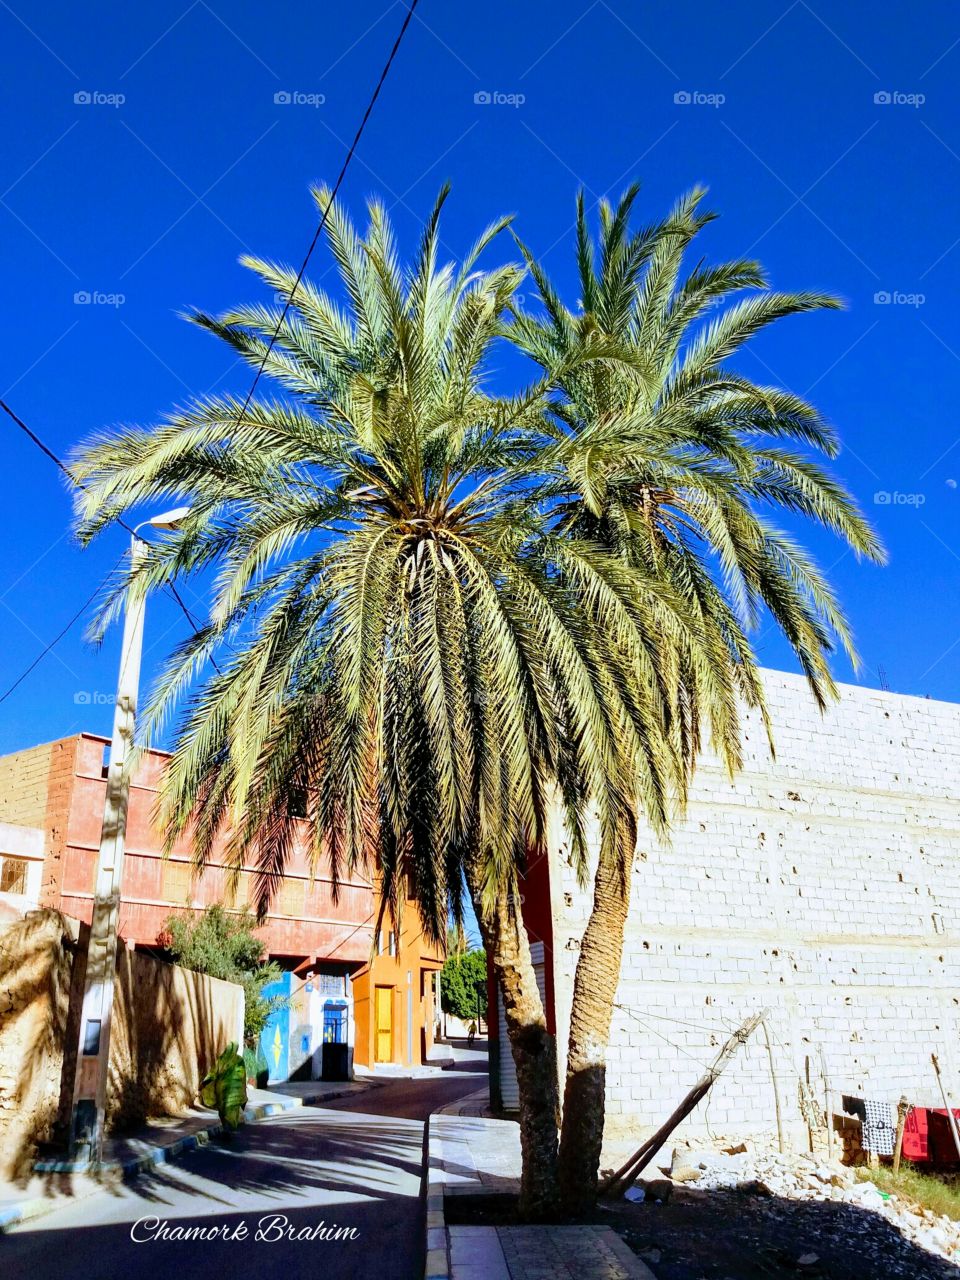 An amazing palm tree in a street in Guelmim.It makes the place so beautiful .When I walked in this road,it attracted my attention by its beauty